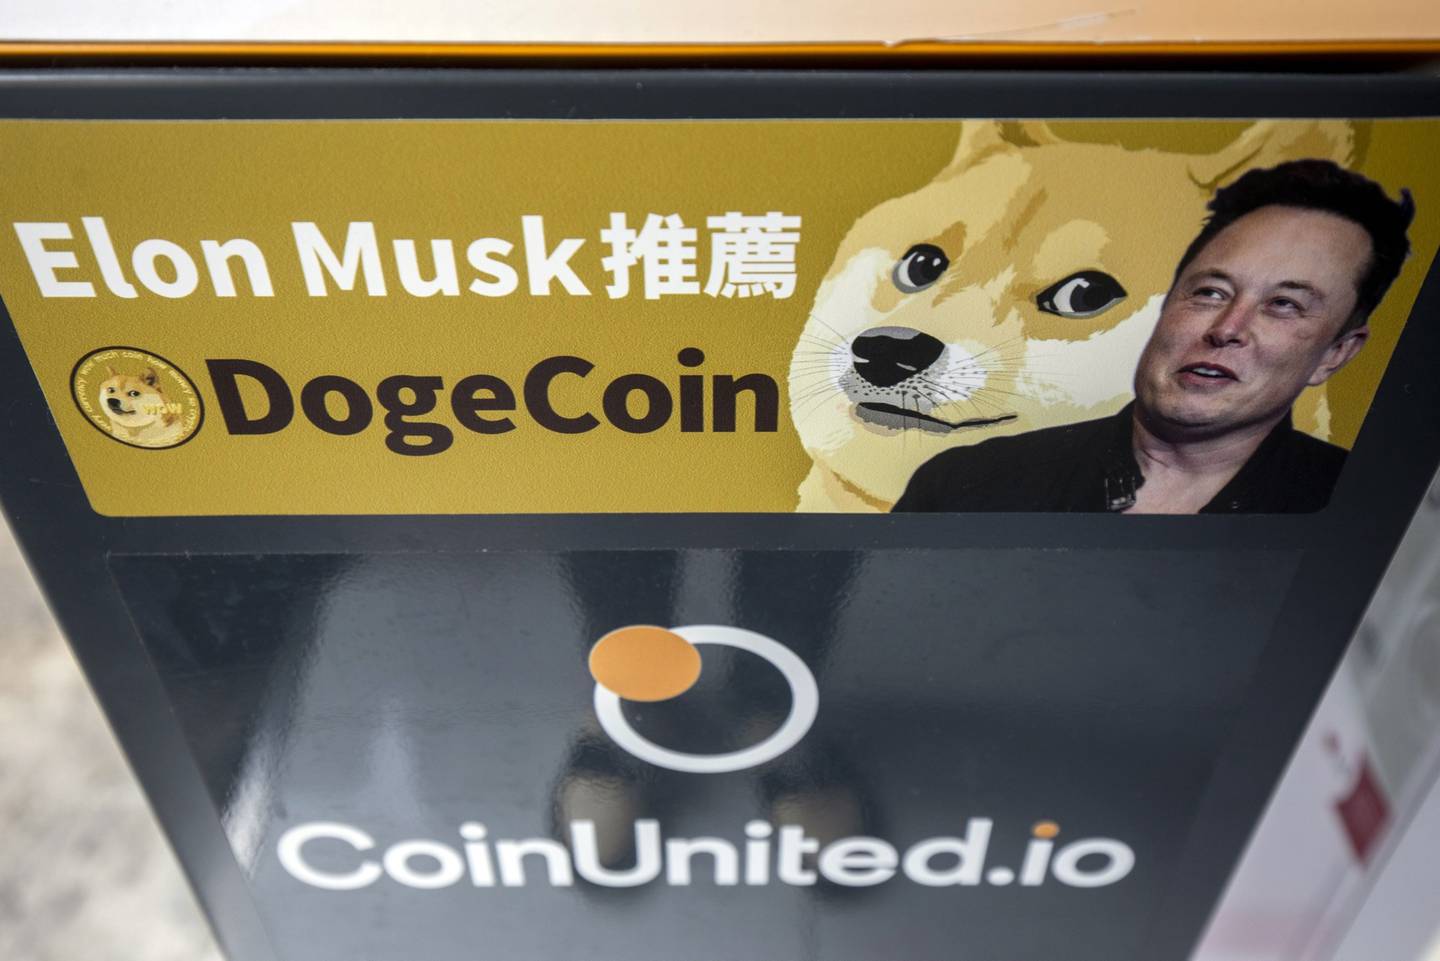 A sticker advertising Dogecoin on a cryptocurrency automated teller machine (ATM) at a laundromat in Hong Kong.